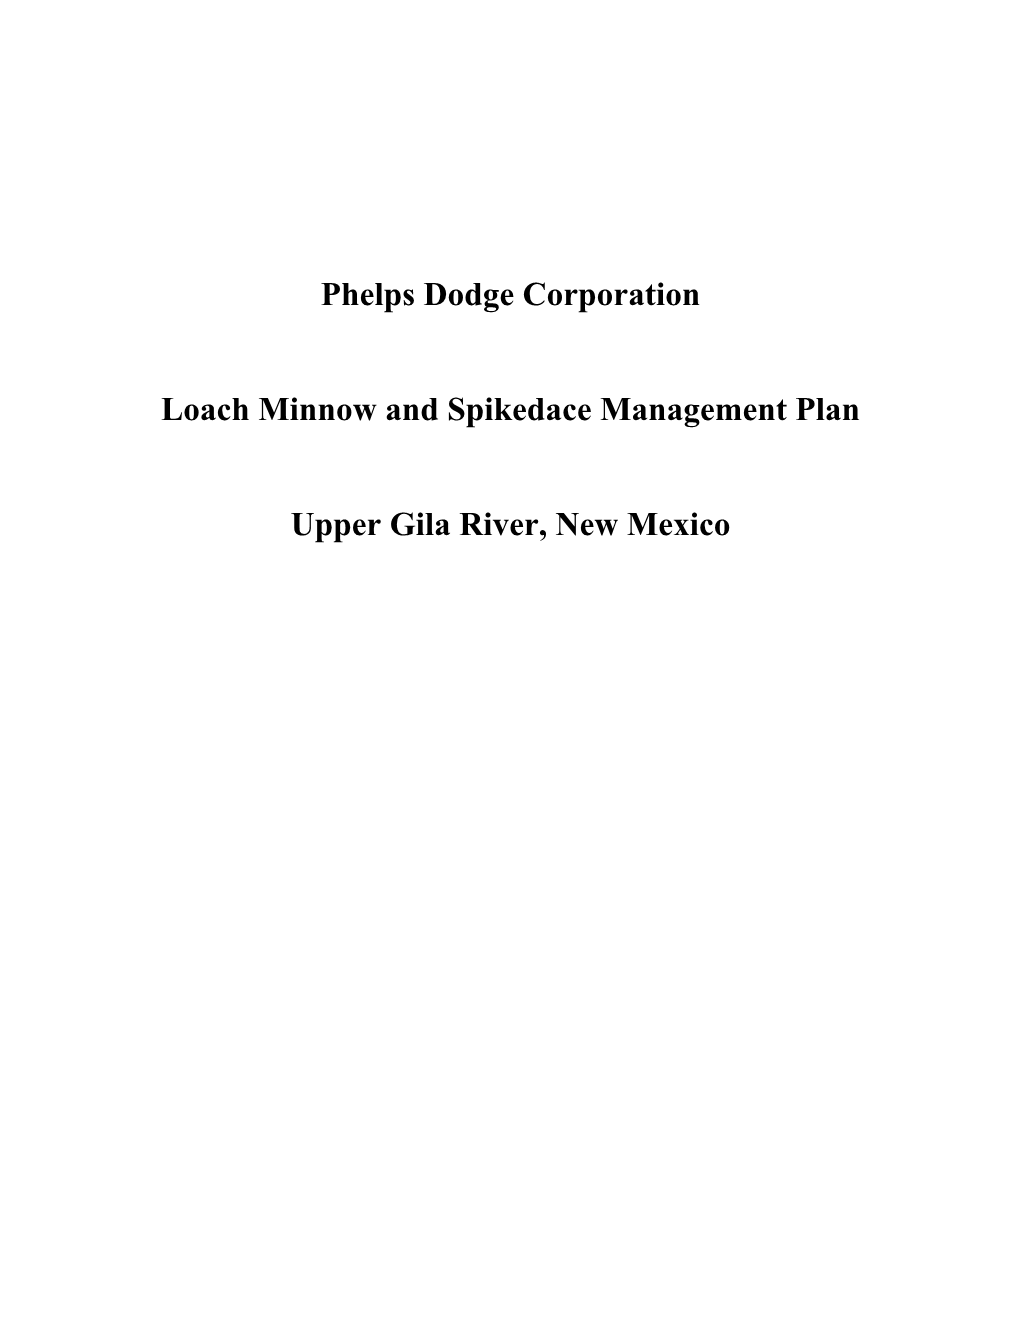 Phelps Dodge Corporation Loach Minnow and Spikedace Management Plan Upper Gila River, New Mexico